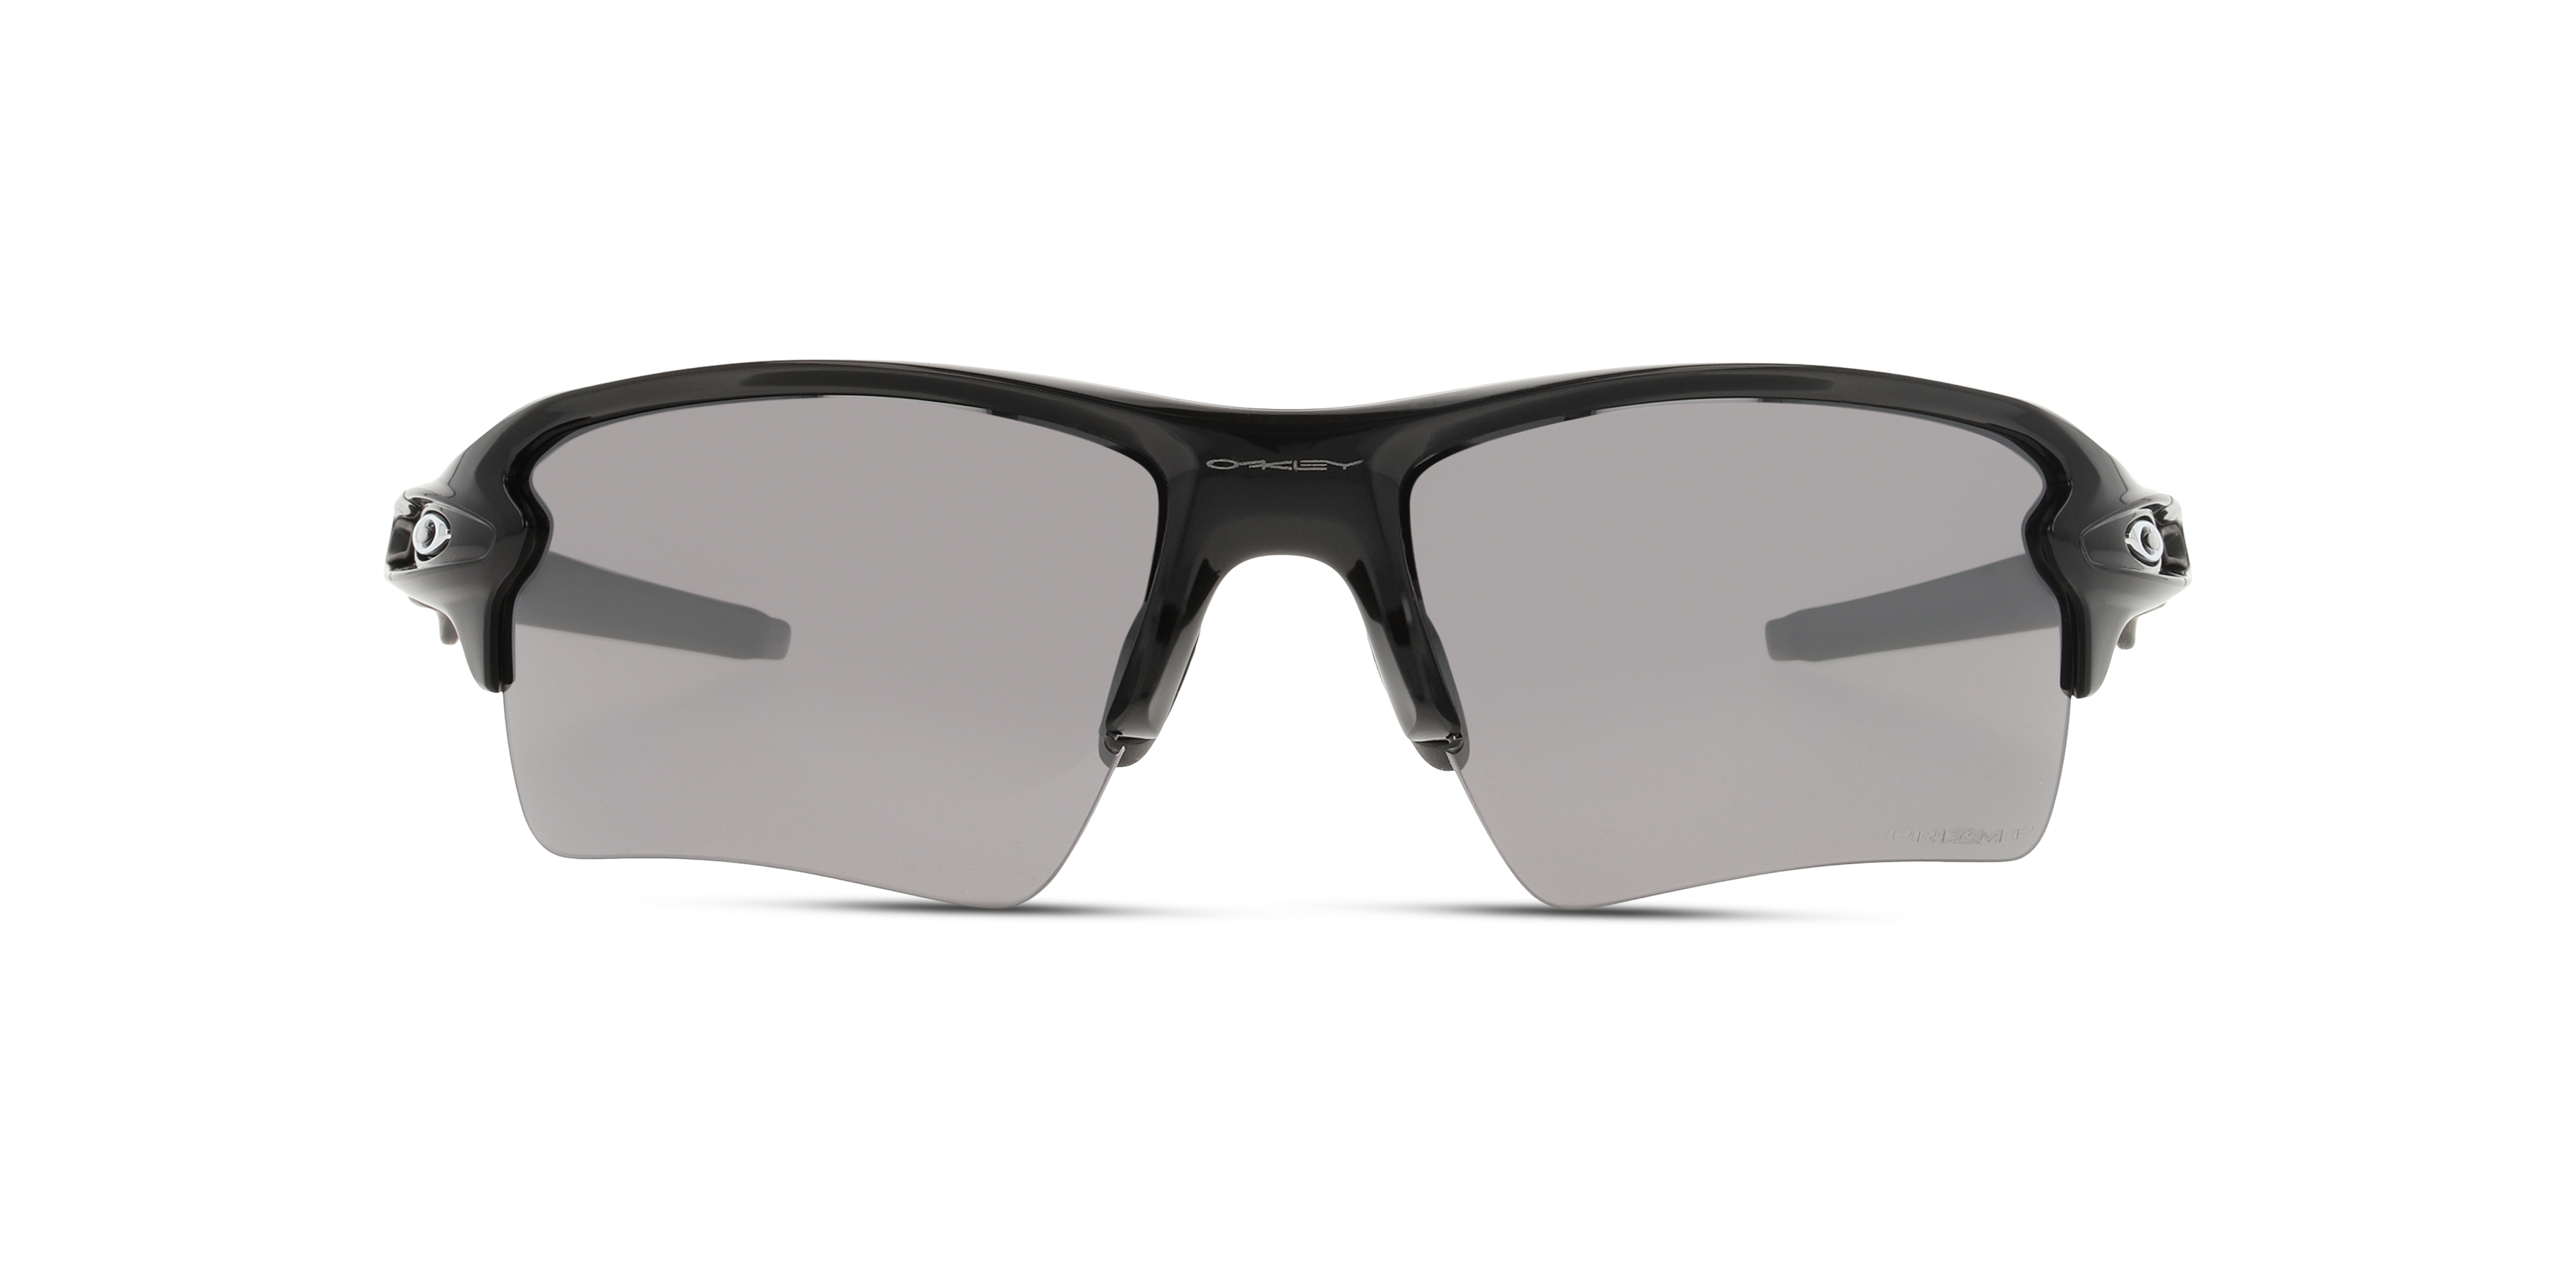 [products.image.front] OAKLEY FLAK 2.0 XL OO9188 918872